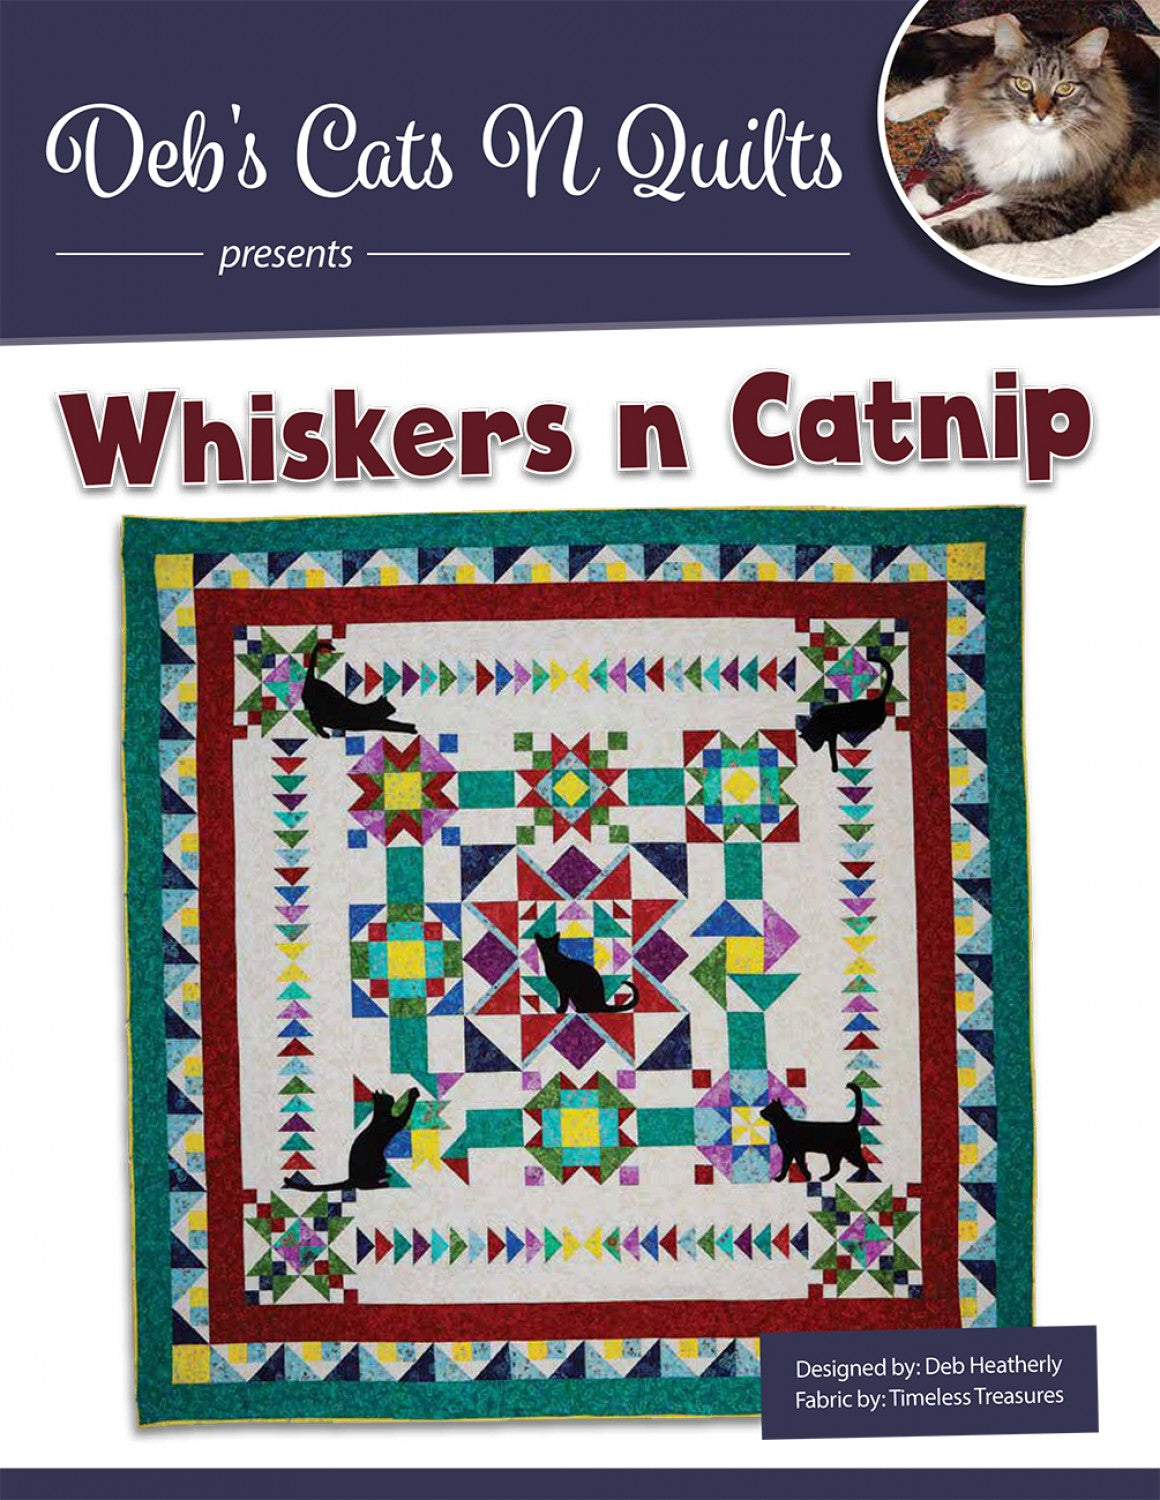 Whiskers n Catnip Block of the Month Quilt Pattern by Deb Heatherly of Deb's Cats N Quilts